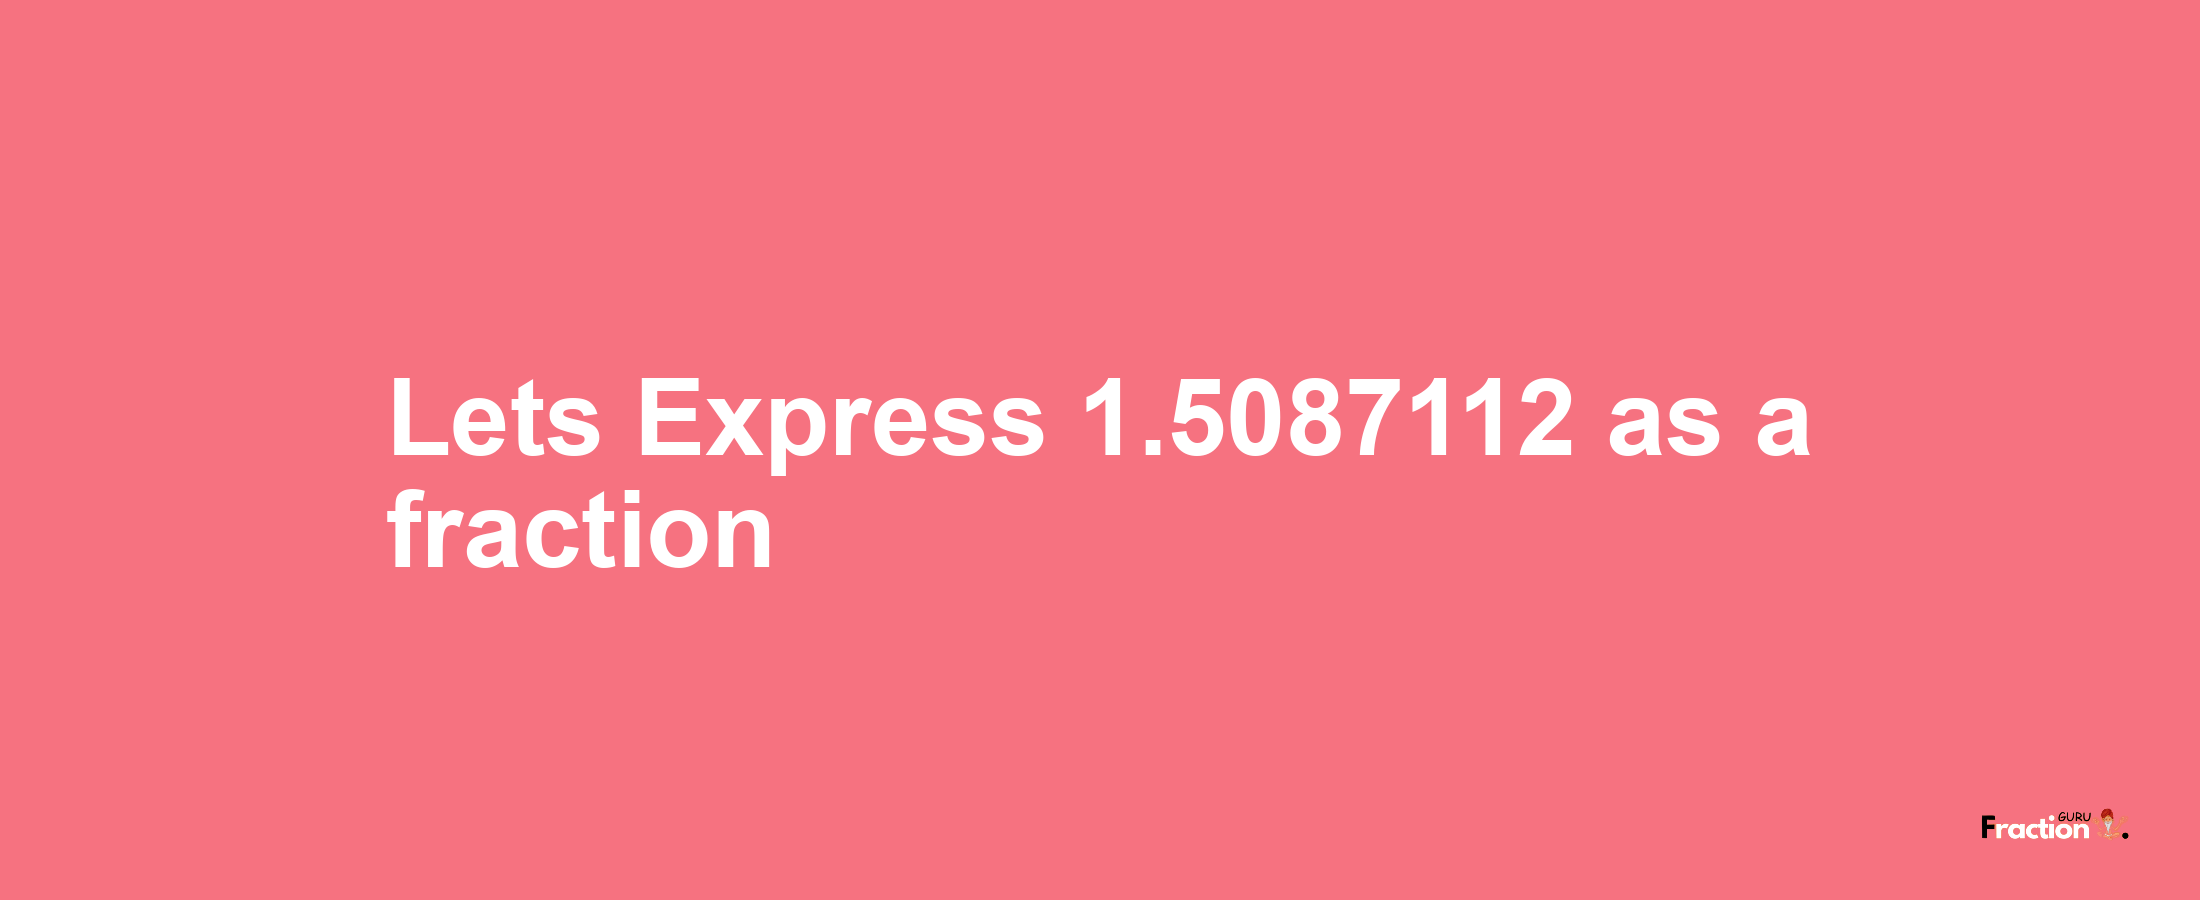 Lets Express 1.5087112 as afraction